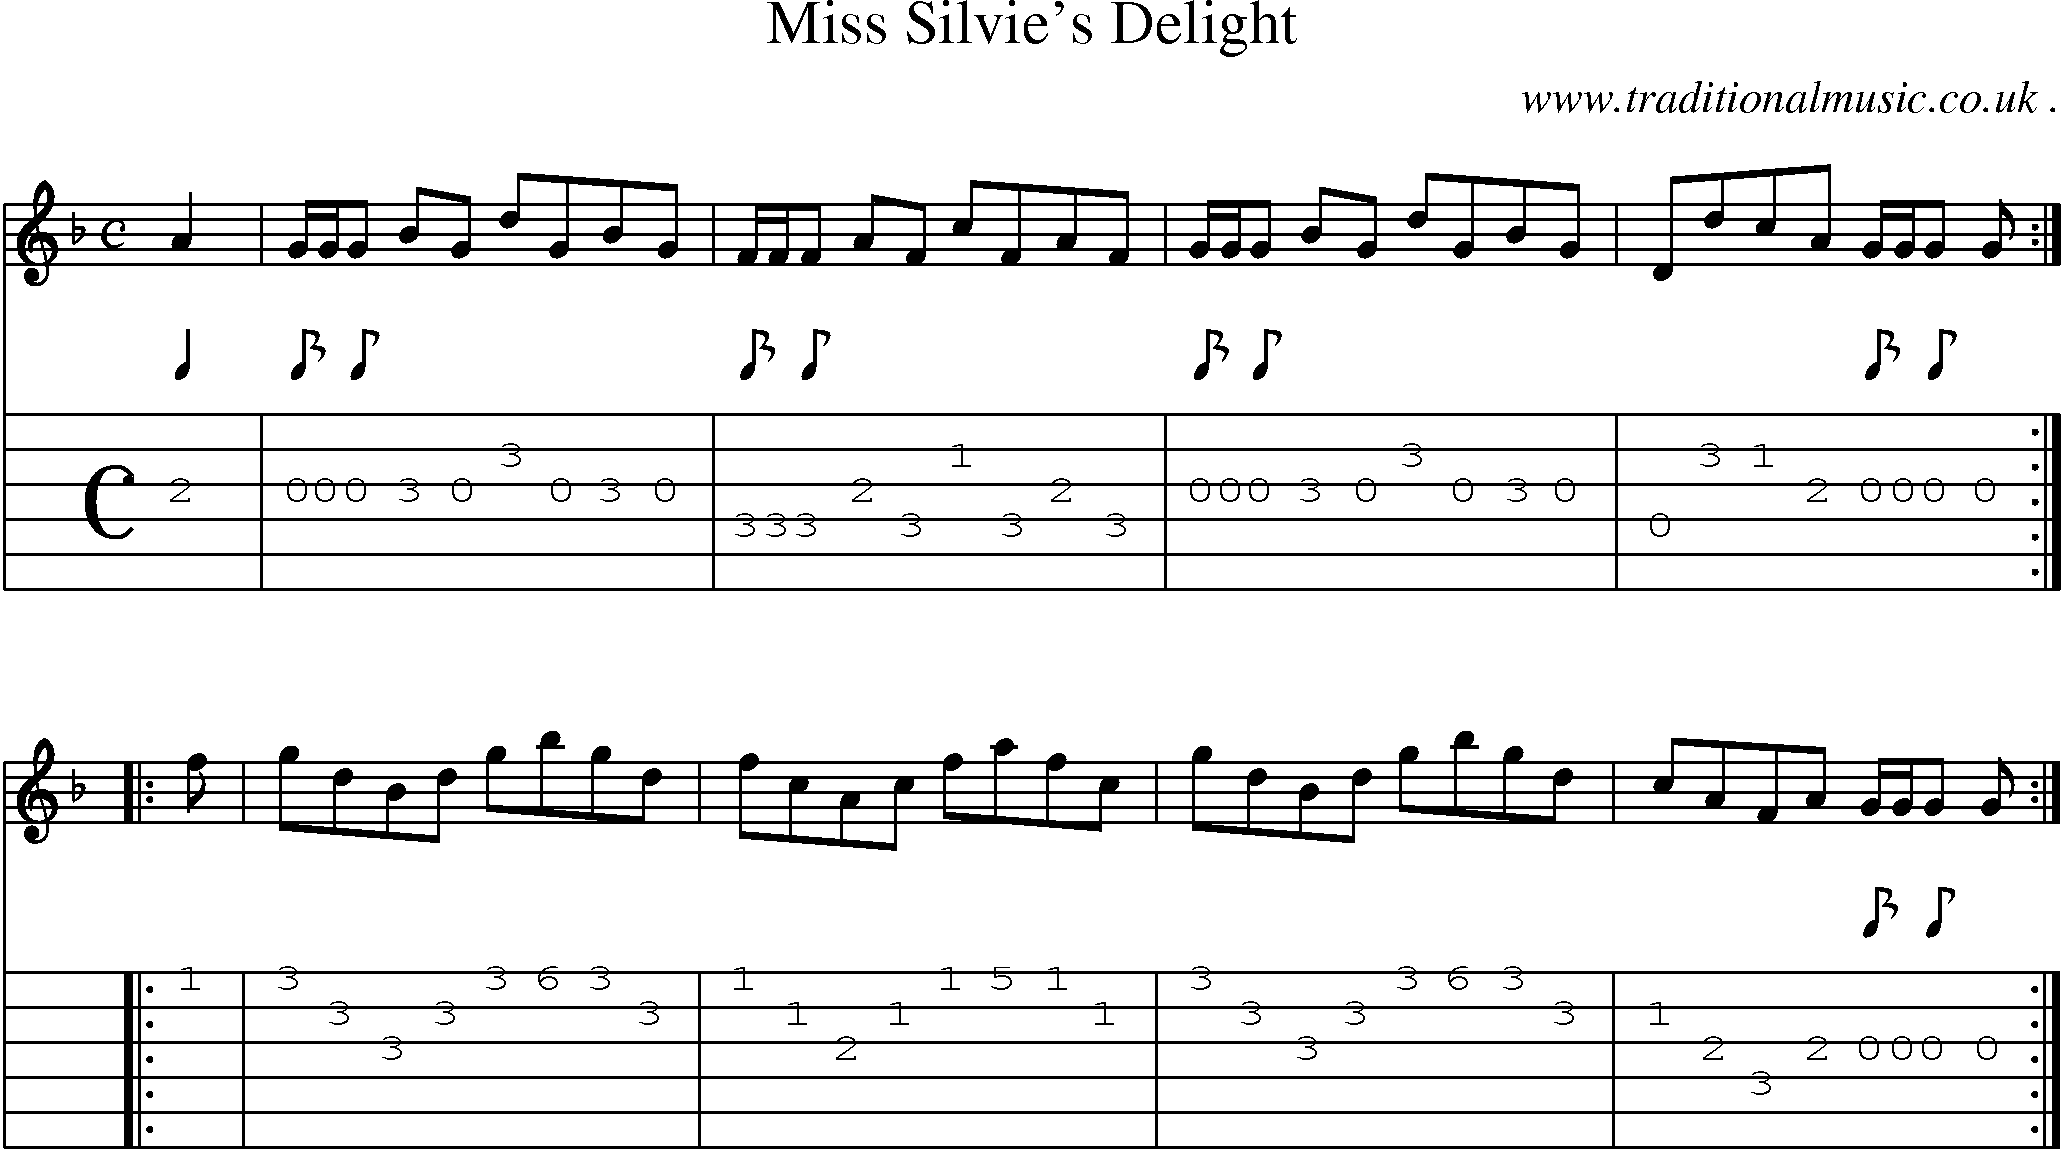 Sheet-music  score, Chords and Guitar Tabs for Miss Silvies Delight